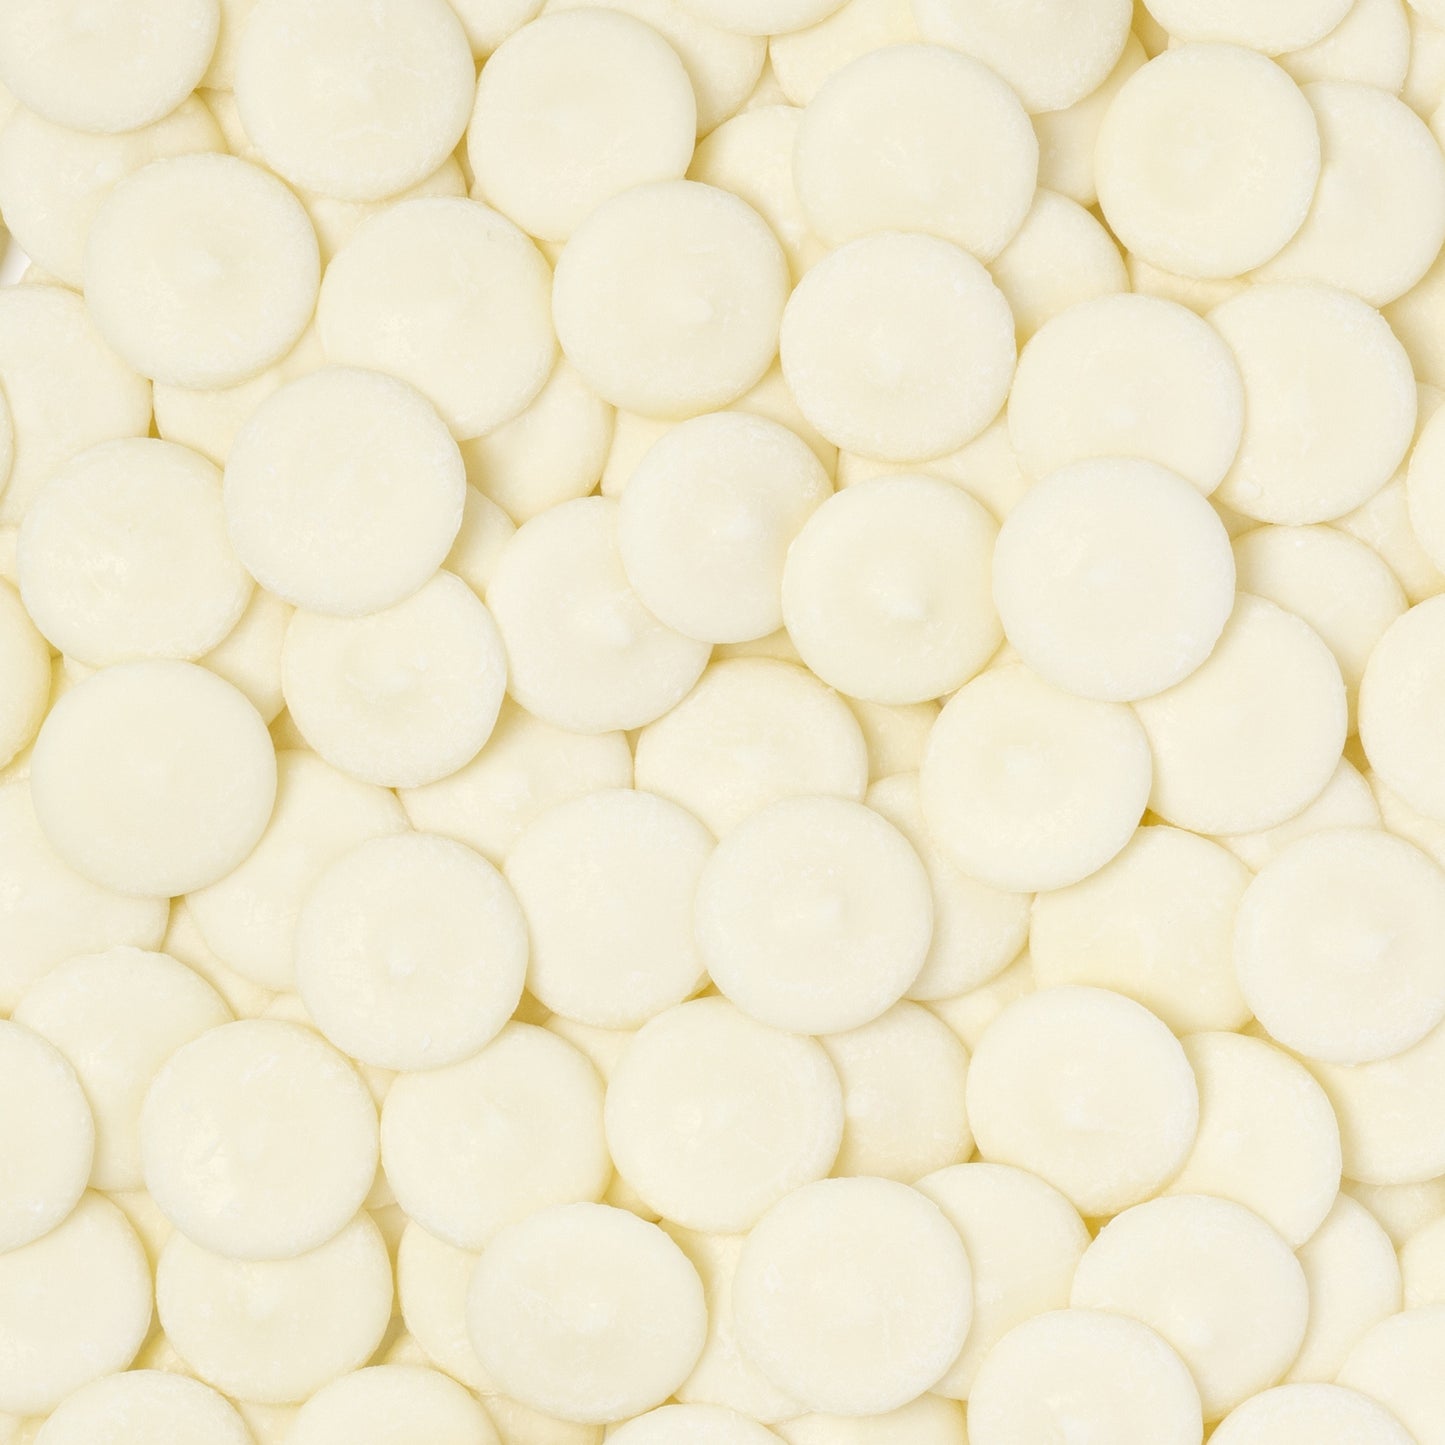 AC Food Crafting Bulk Candy Wafers 50lbs-White